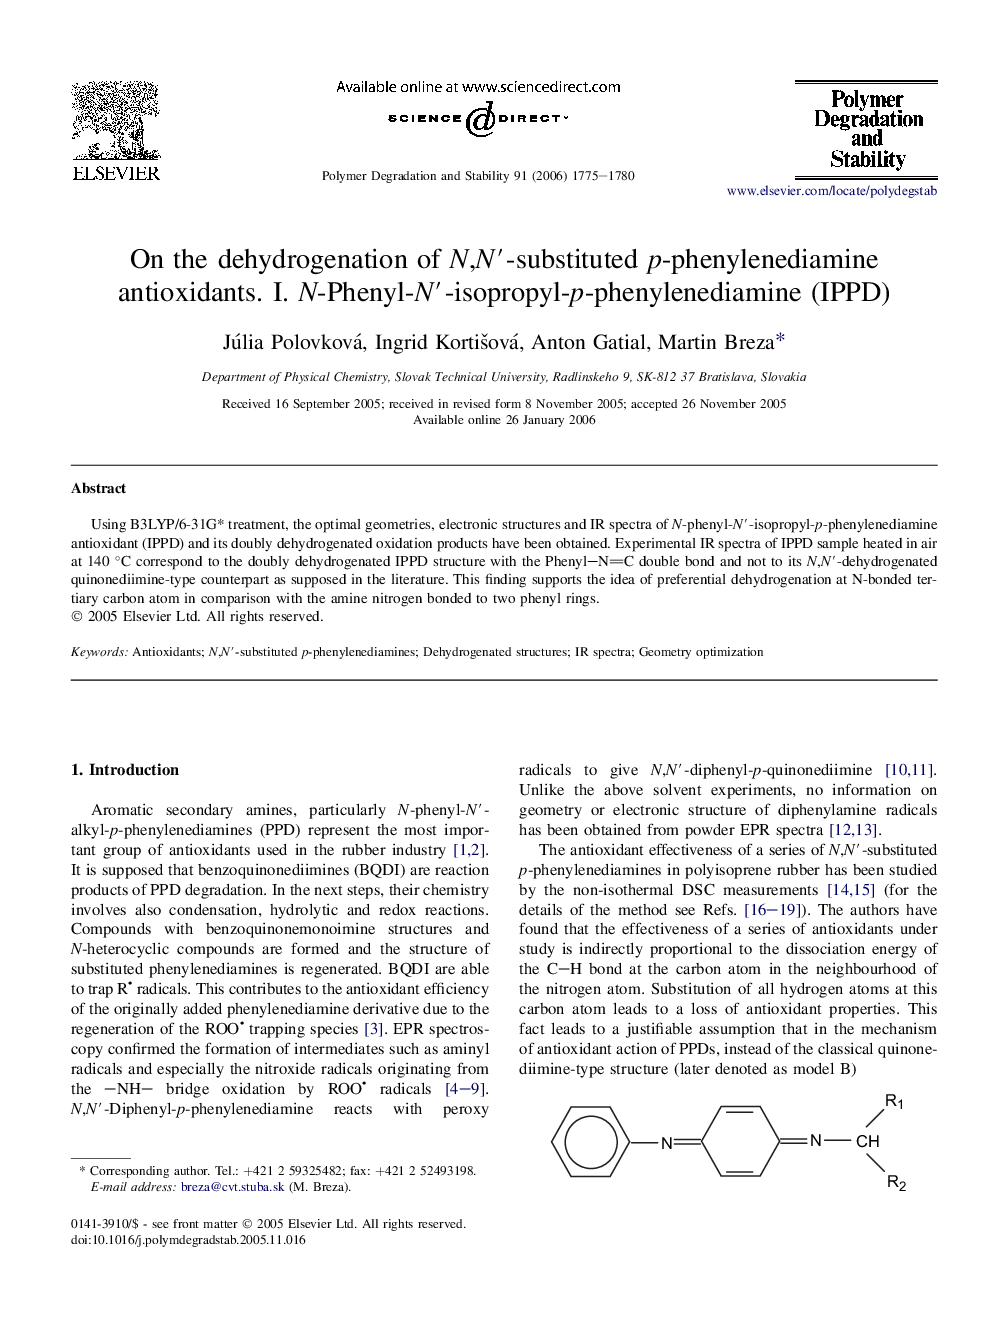 On the dehydrogenation of N,Nâ²-substituted p-phenylenediamine antioxidants. I. N-Phenyl-Nâ²-isopropyl-p-phenylenediamine (IPPD)